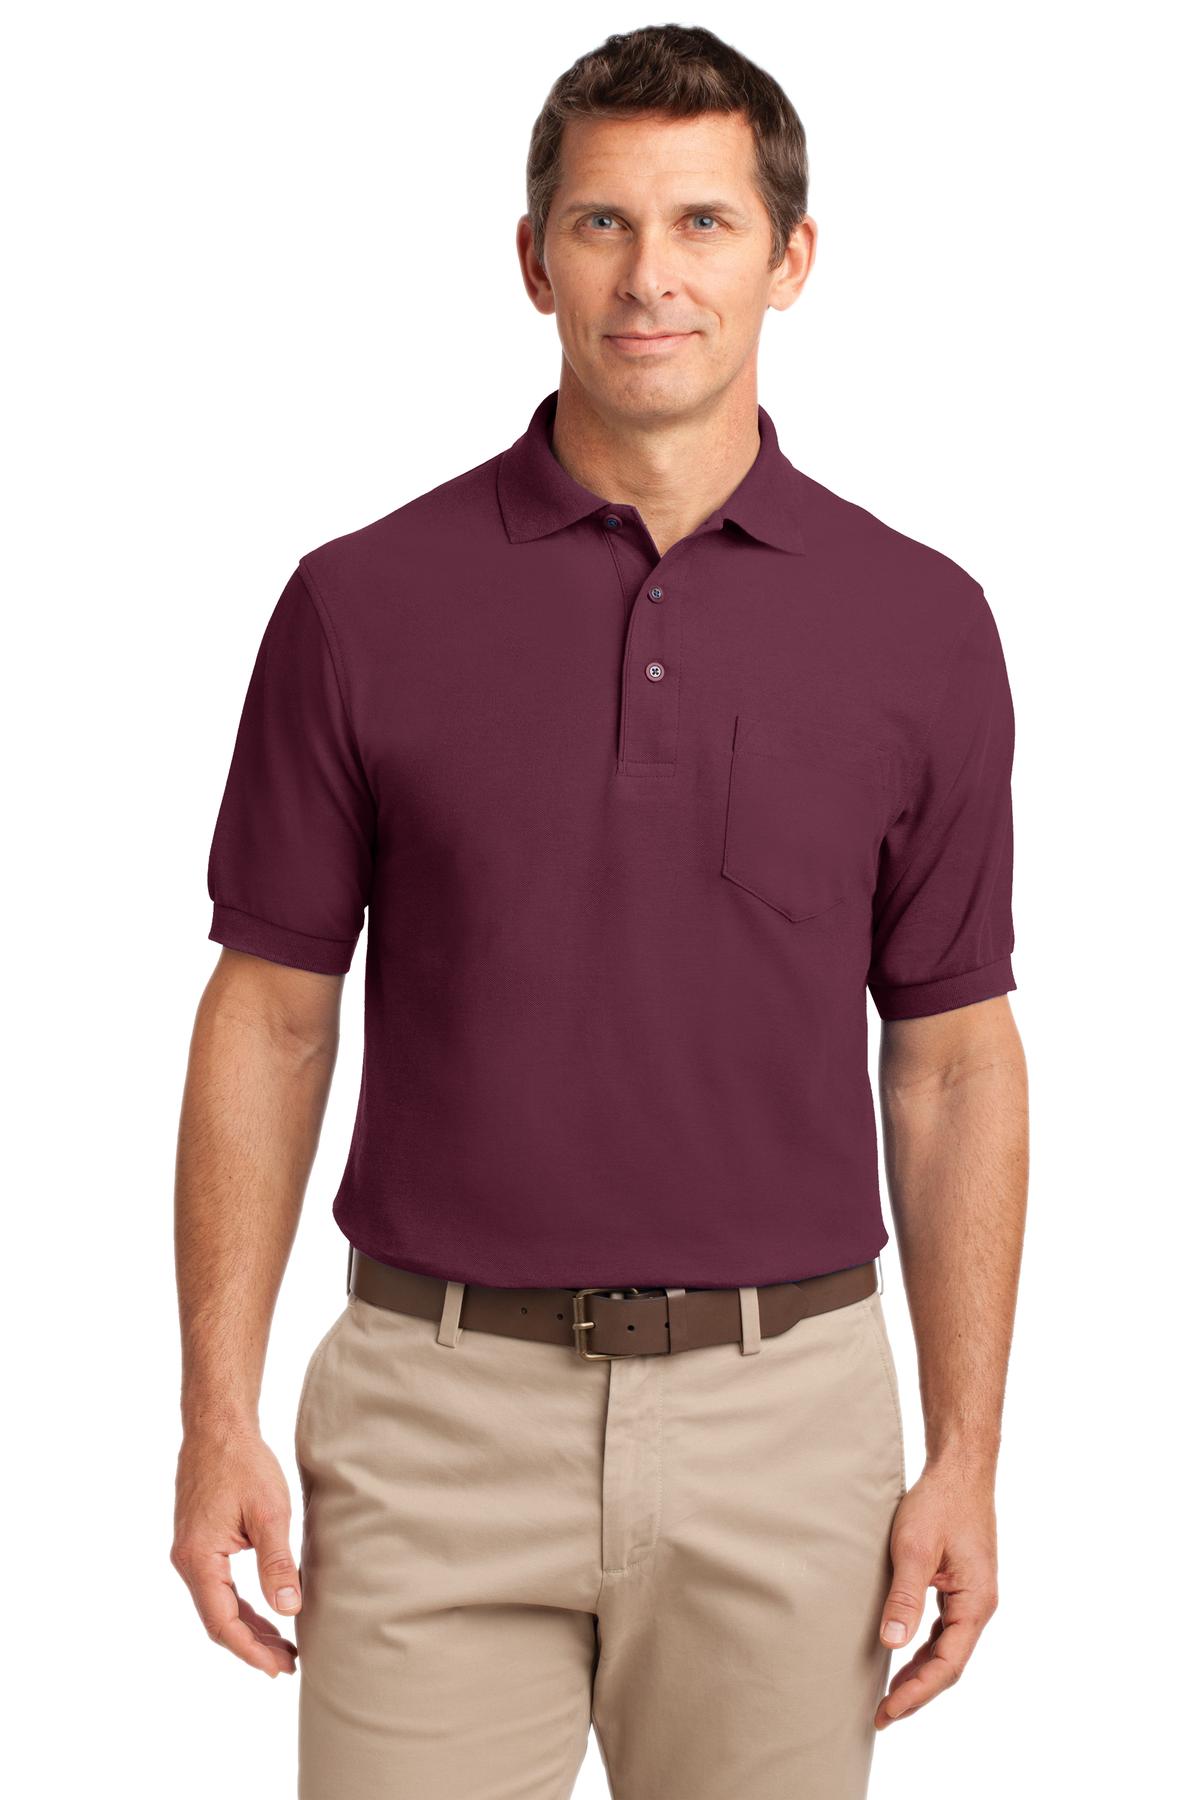 You Know And Good McCree Mens Regular-Fit Cotton Polo Shirt Short Sleeve